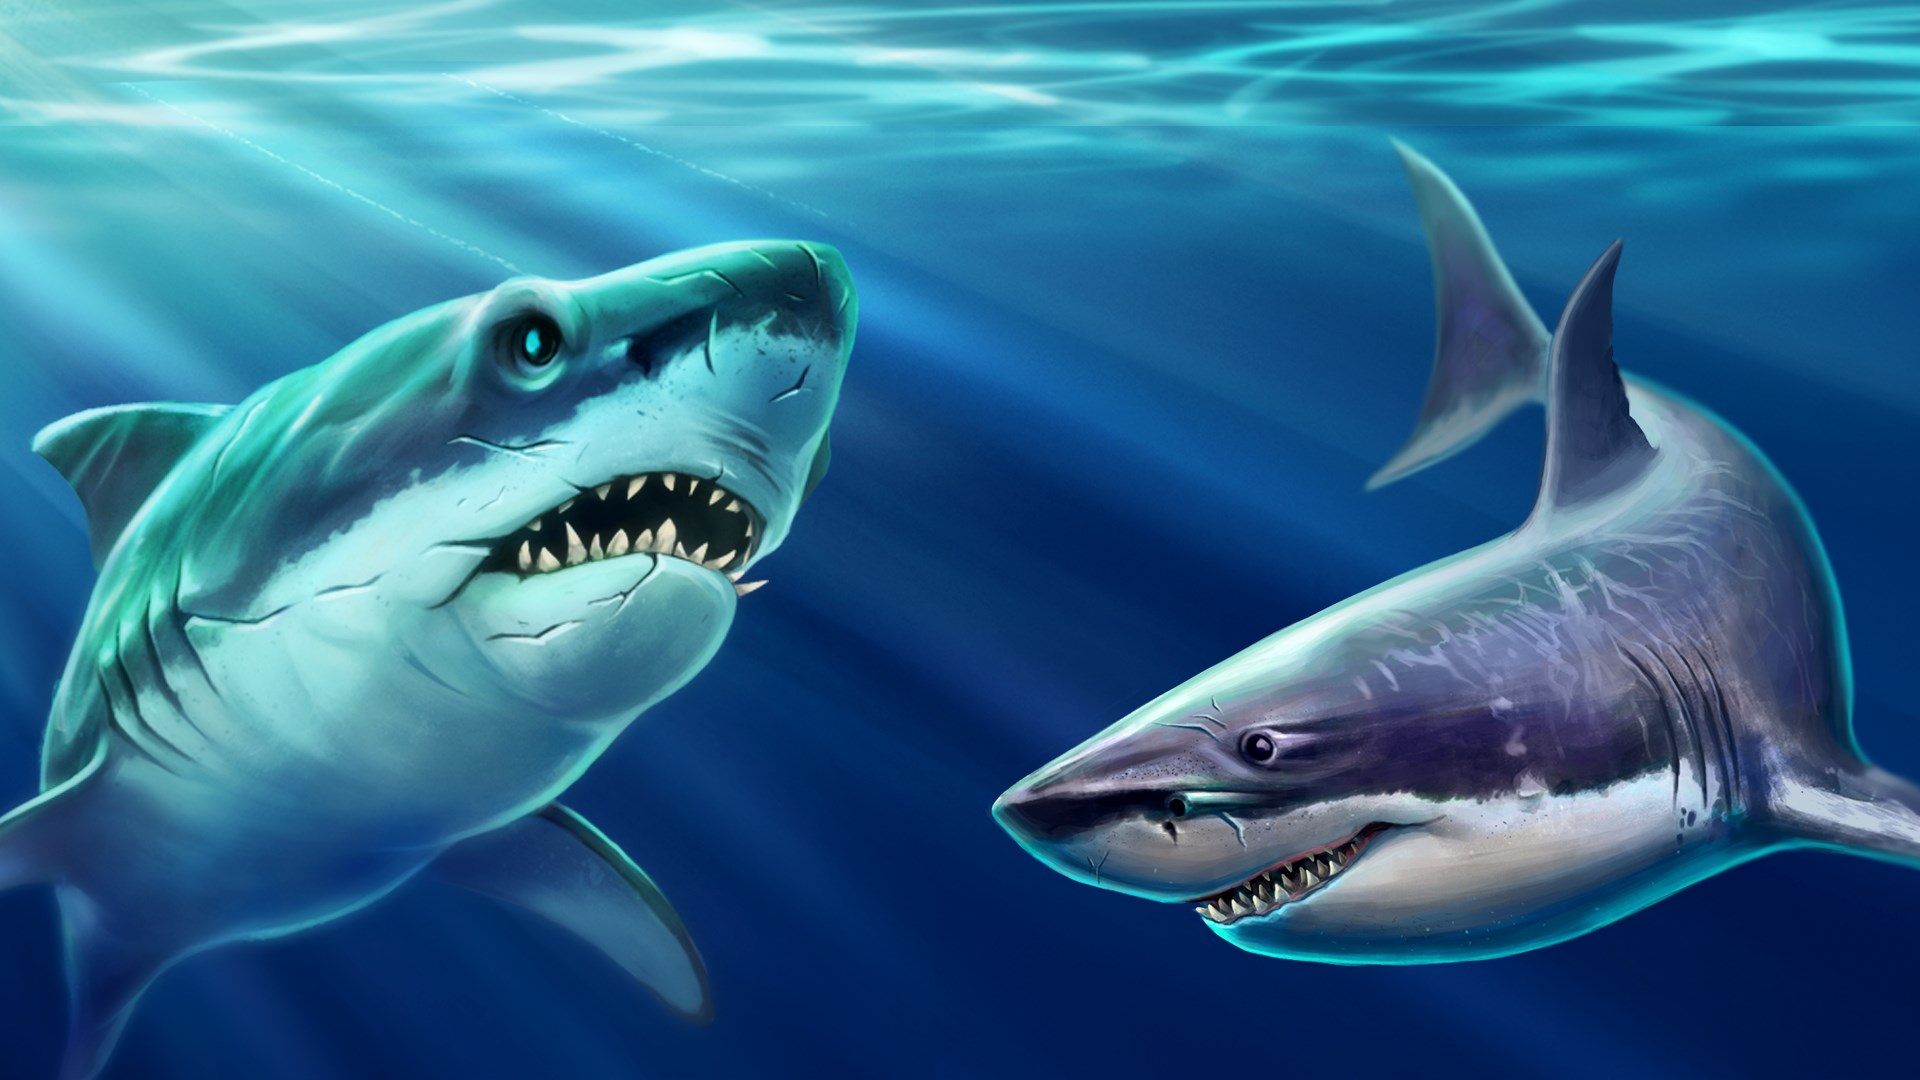 Angry Shark Online — play online for free on Yandex Games